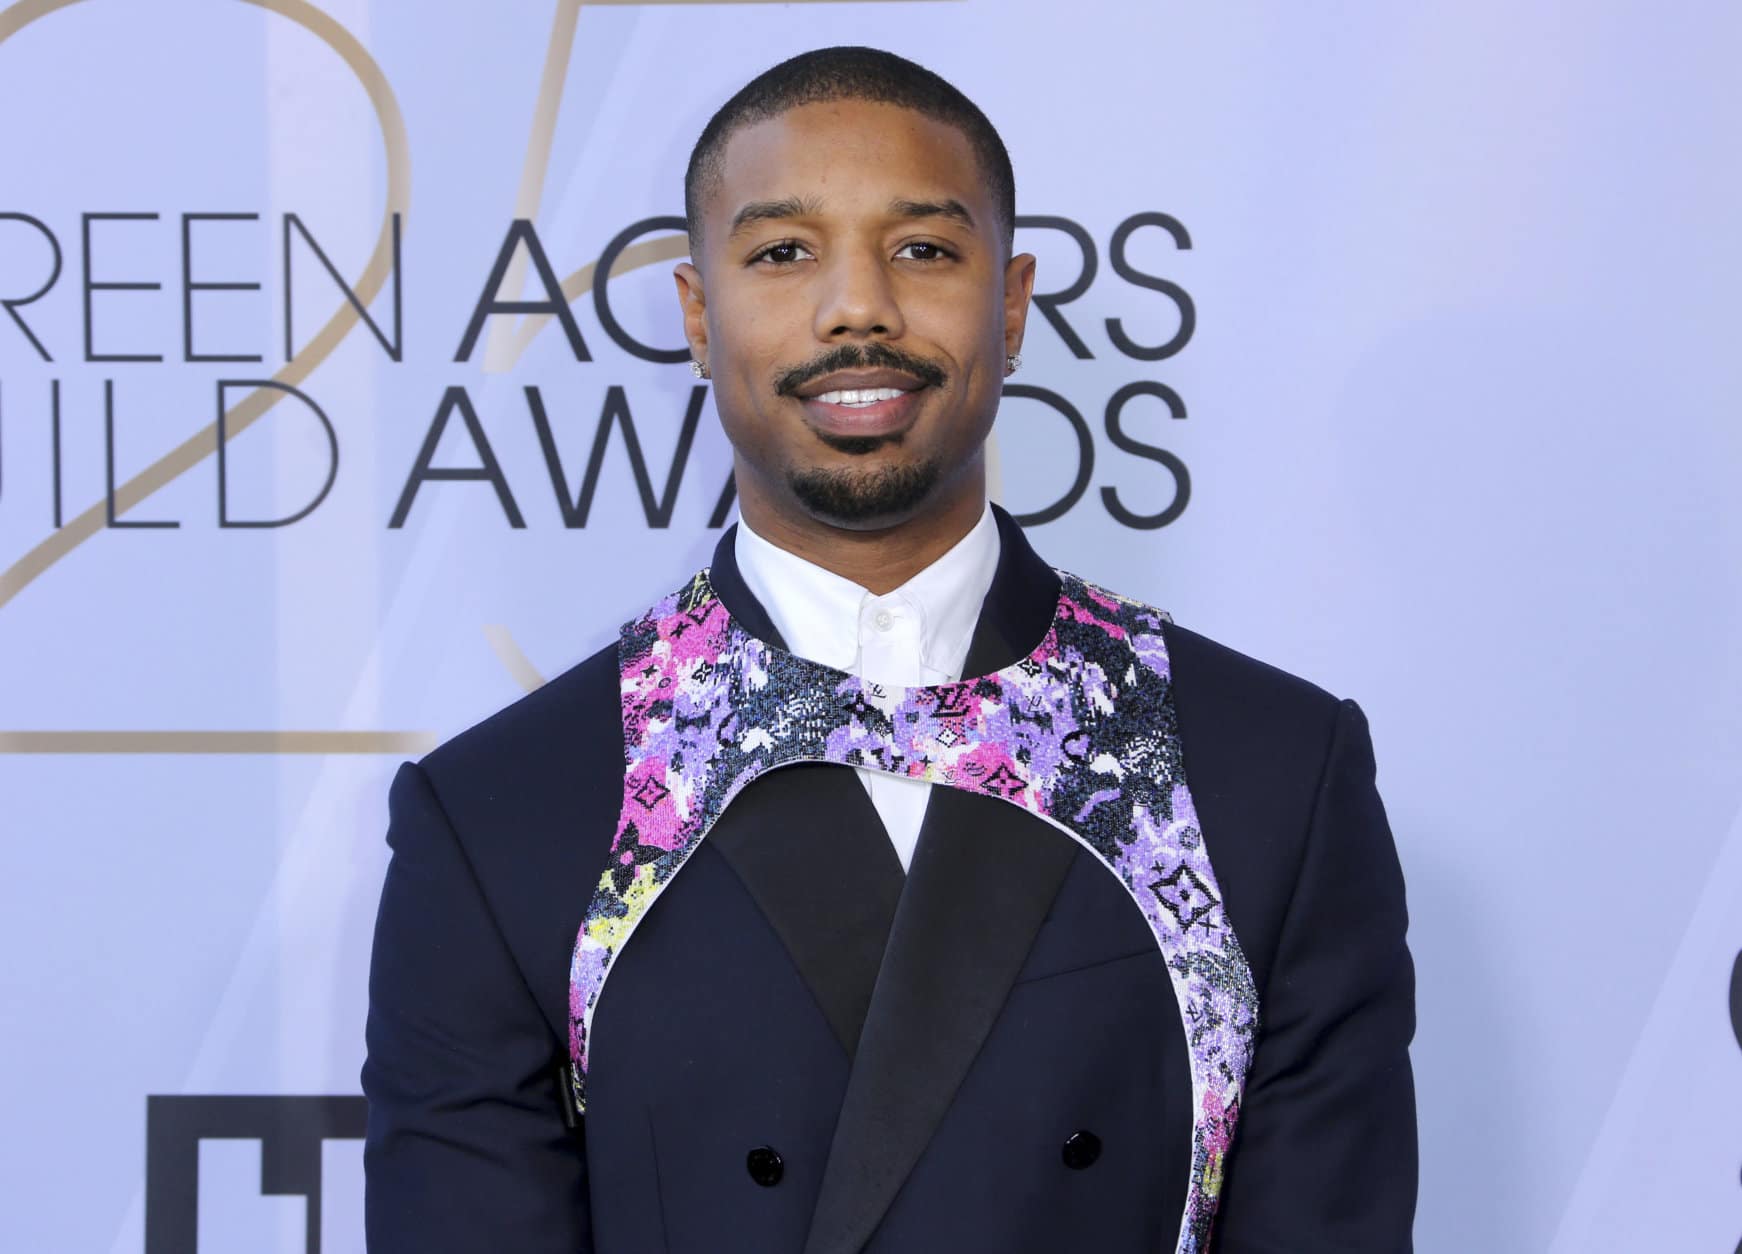 Michael B. Jordan arrives at the 25th annual Screen Actors Guild Awards at the Shrine Auditorium &amp; Expo Hall on Sunday, Jan. 27, 2019, in Los Angeles. (Photo by Willy Sanjuan/Invision/AP)